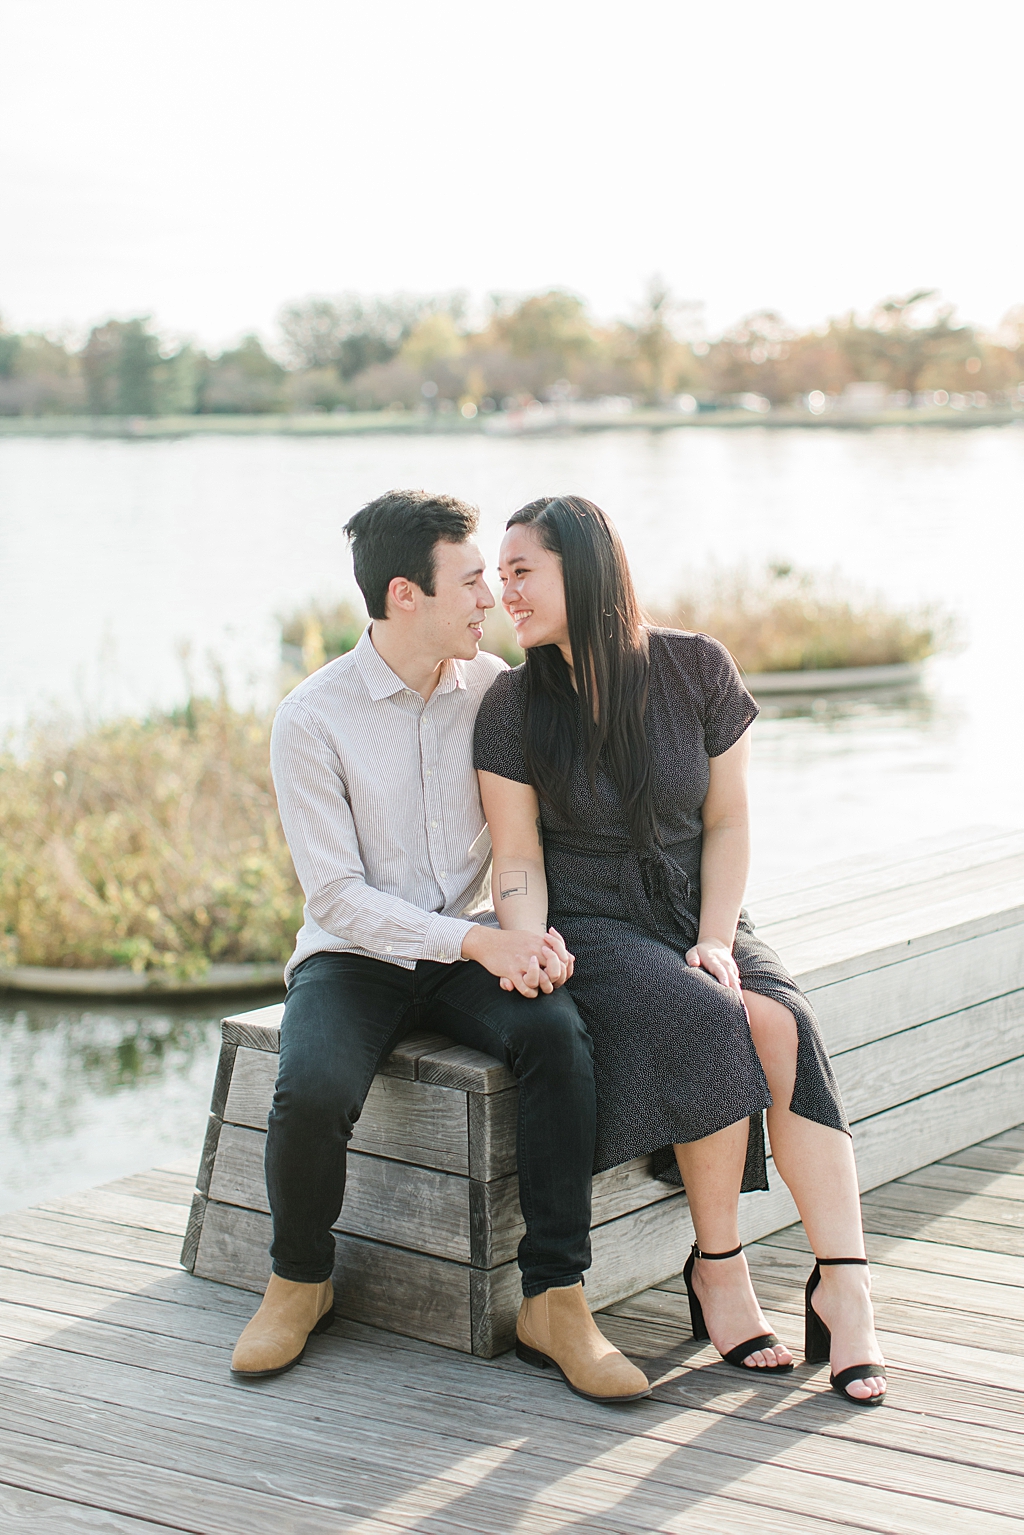 Becky_Collin_Navy_Yards_Park_The_Wharf_Washington_DC_Fall_Engagement_Session_AngelikaJohnsPhotography-7519.jpg